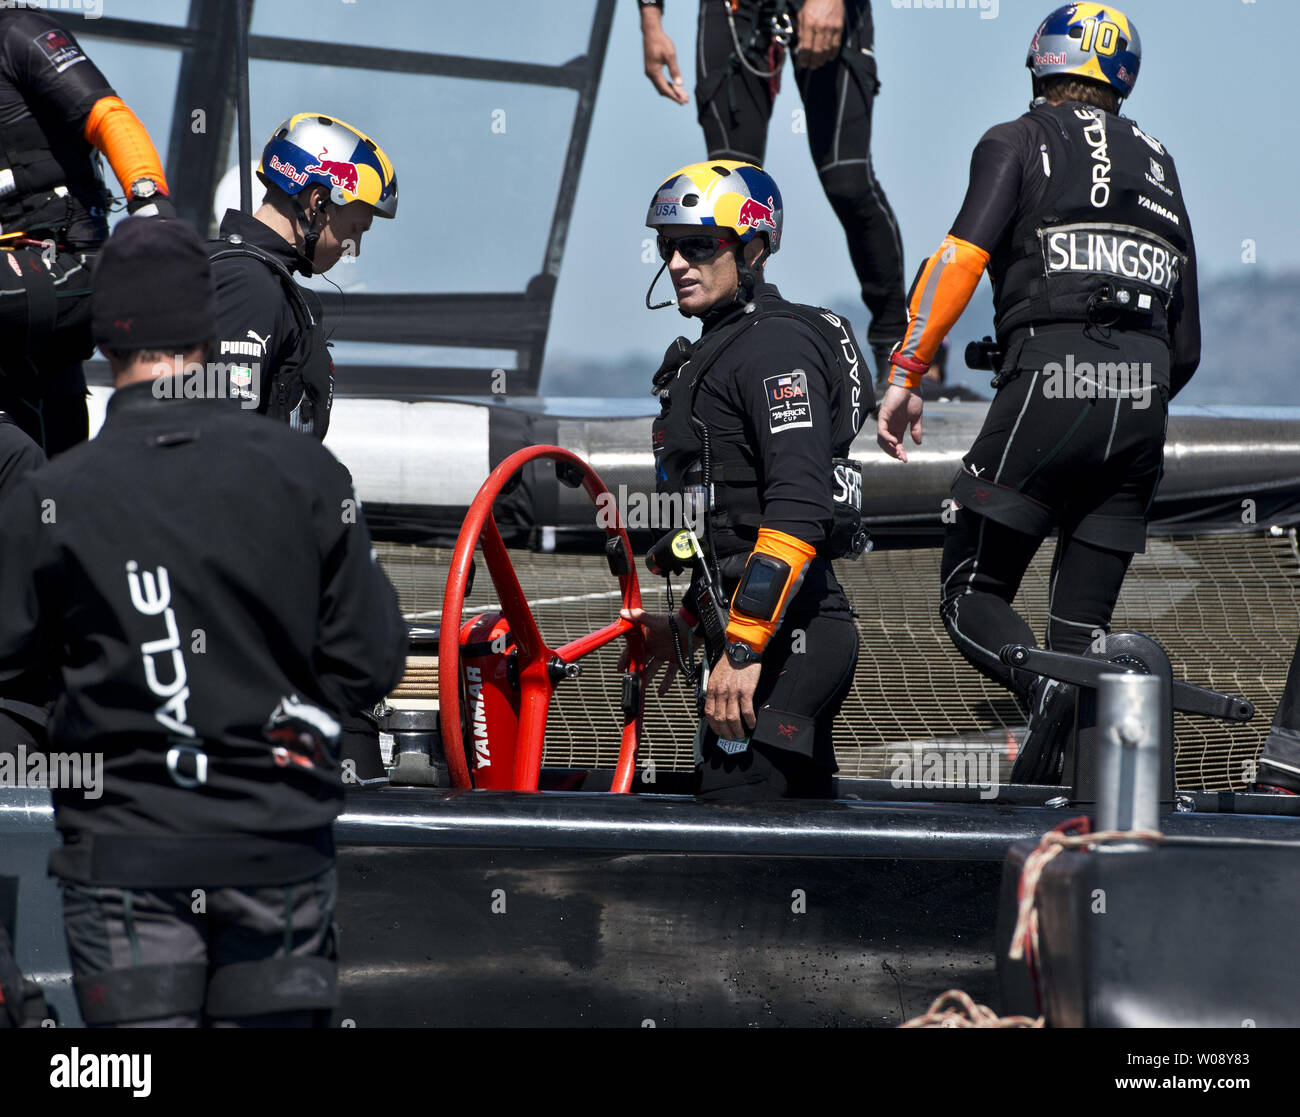 Oracle Team USA skipper Jimmy Spithill (C) talks to the support crew after they defeated Emirates New Zealand in race 12 of the America's Cup Regatta against Emirates New Zealand on San Francisco Bay on September 19, 2013. The Americans lead all the way and won the race. The score is now 8-2 for the Kiwis.     UPI/Terry Schmitt Stock Photo